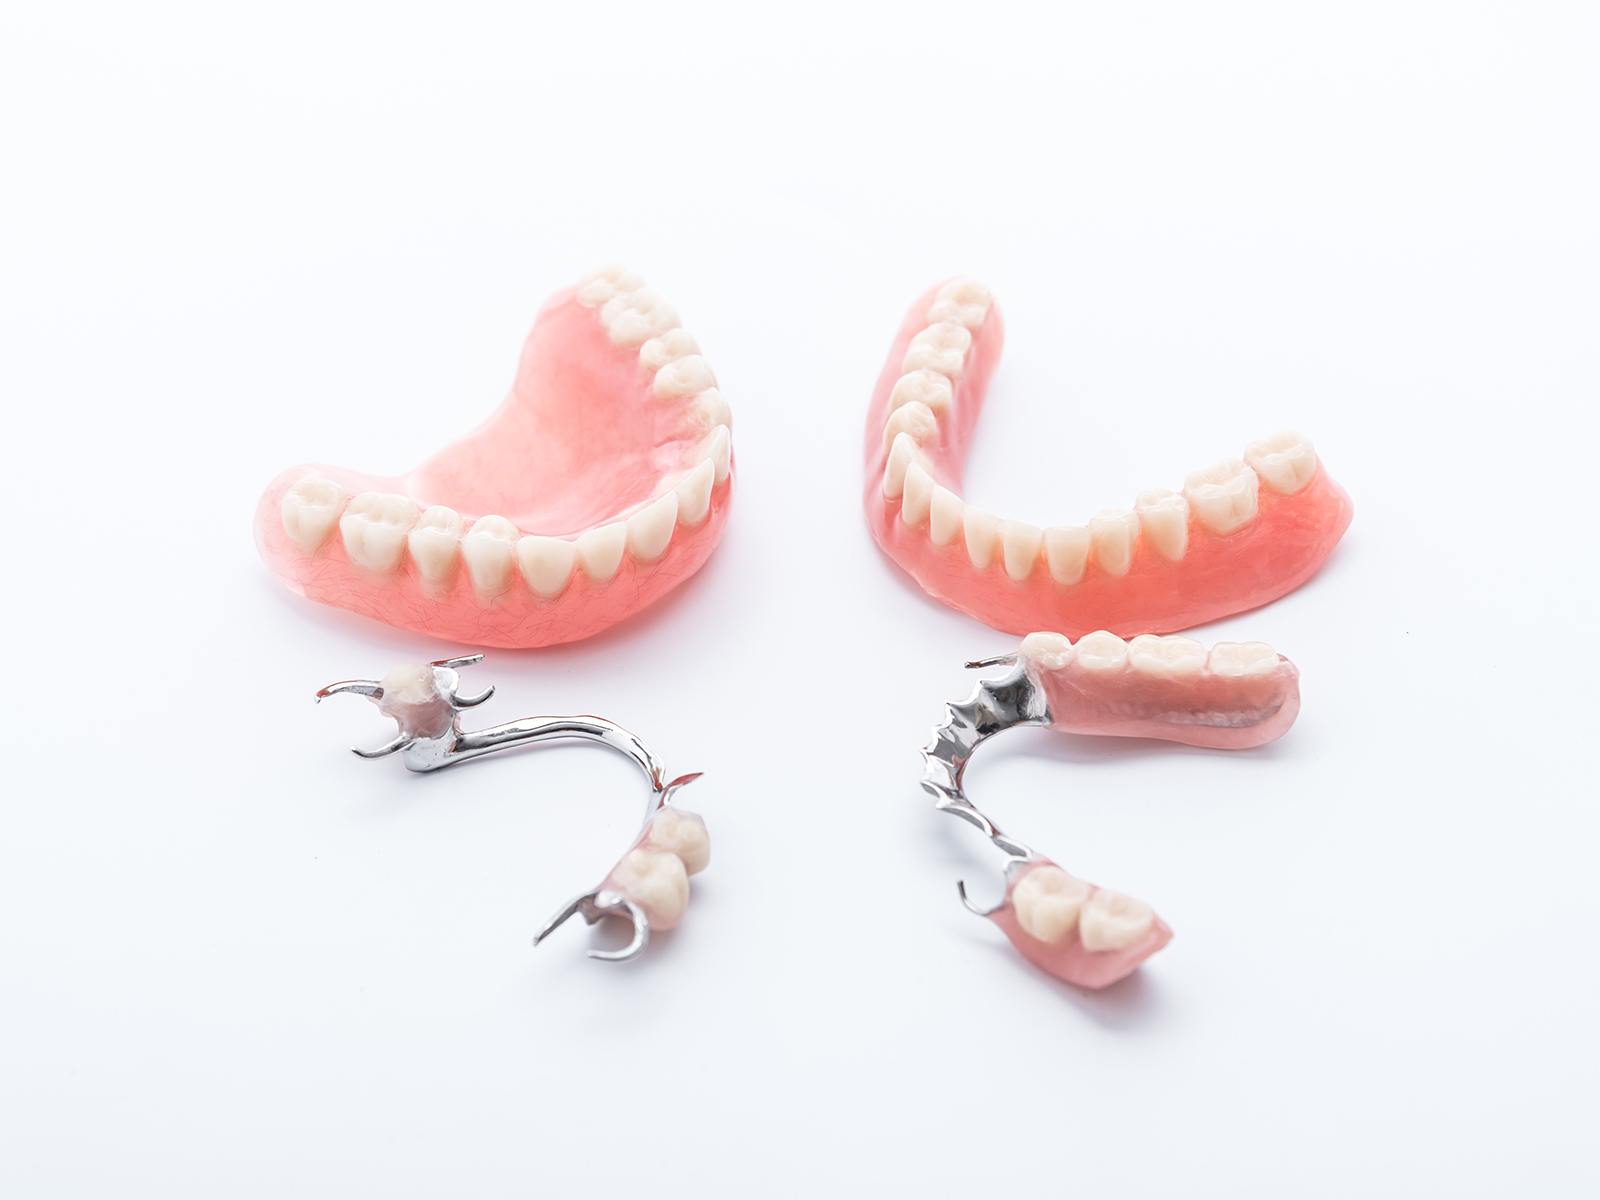 What is The Most Natural Looking Dentures?